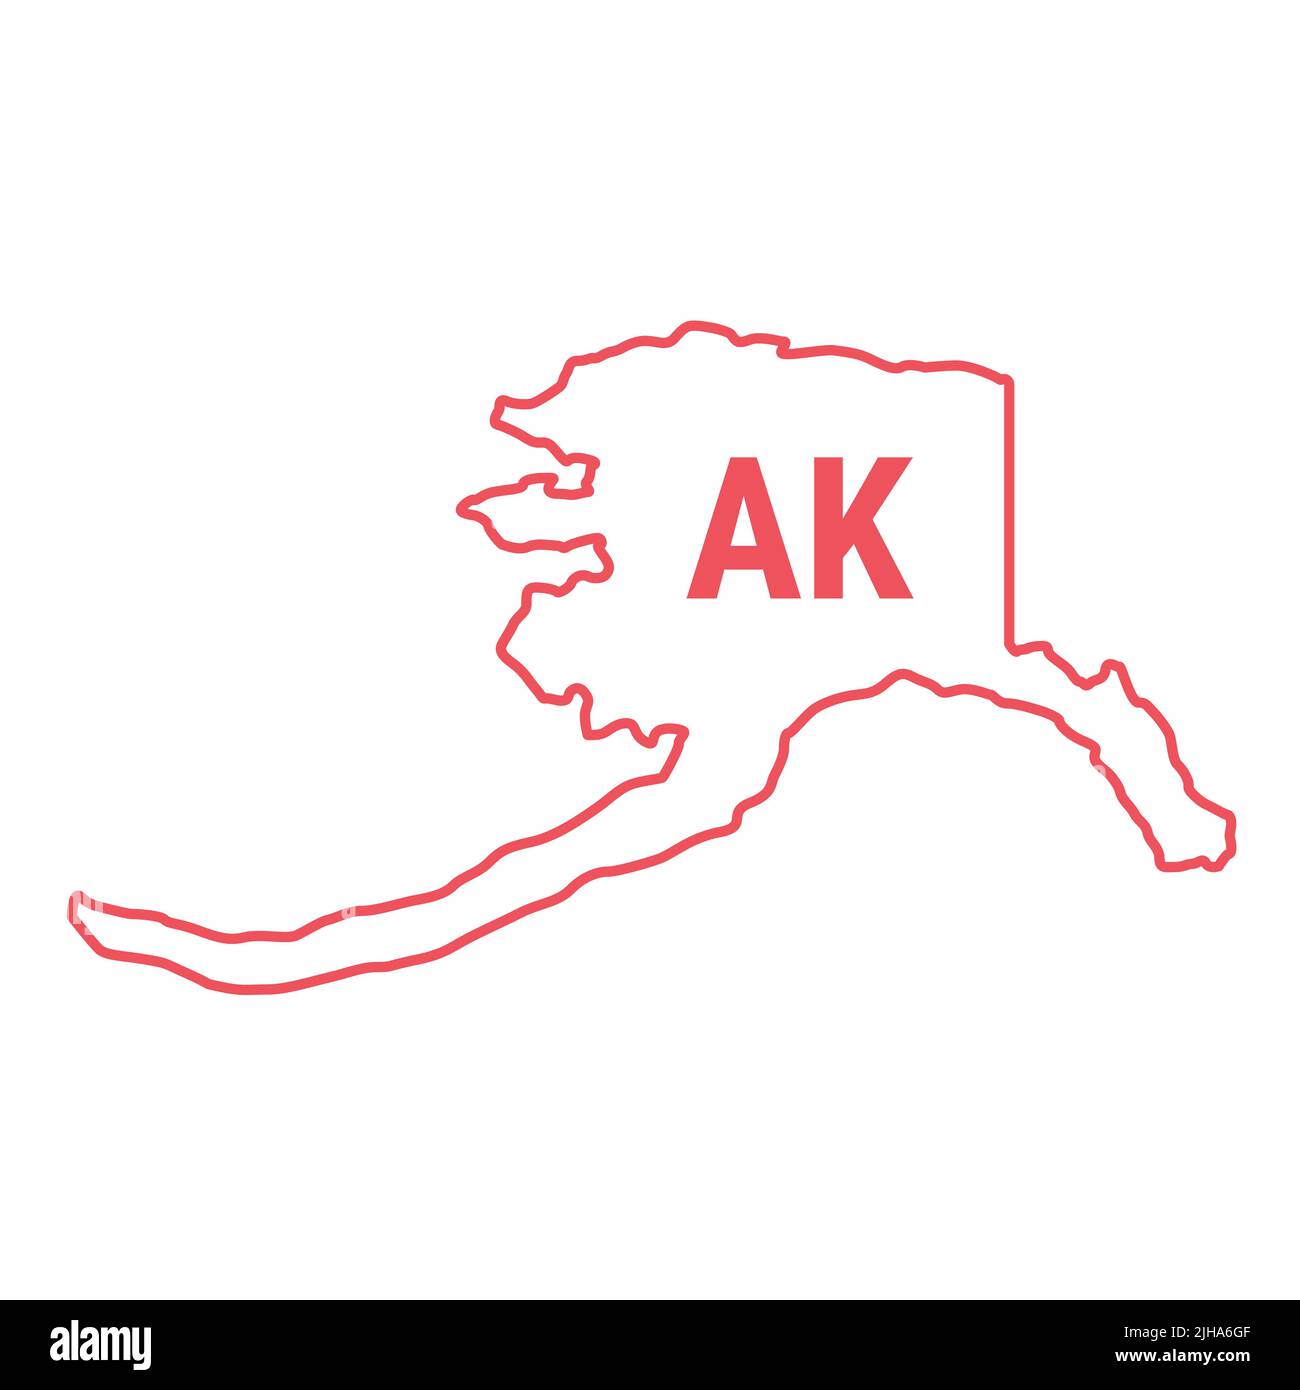 Alaska Us State Map Red Outline Border Illustration Isolated On White Two Letter State 5590